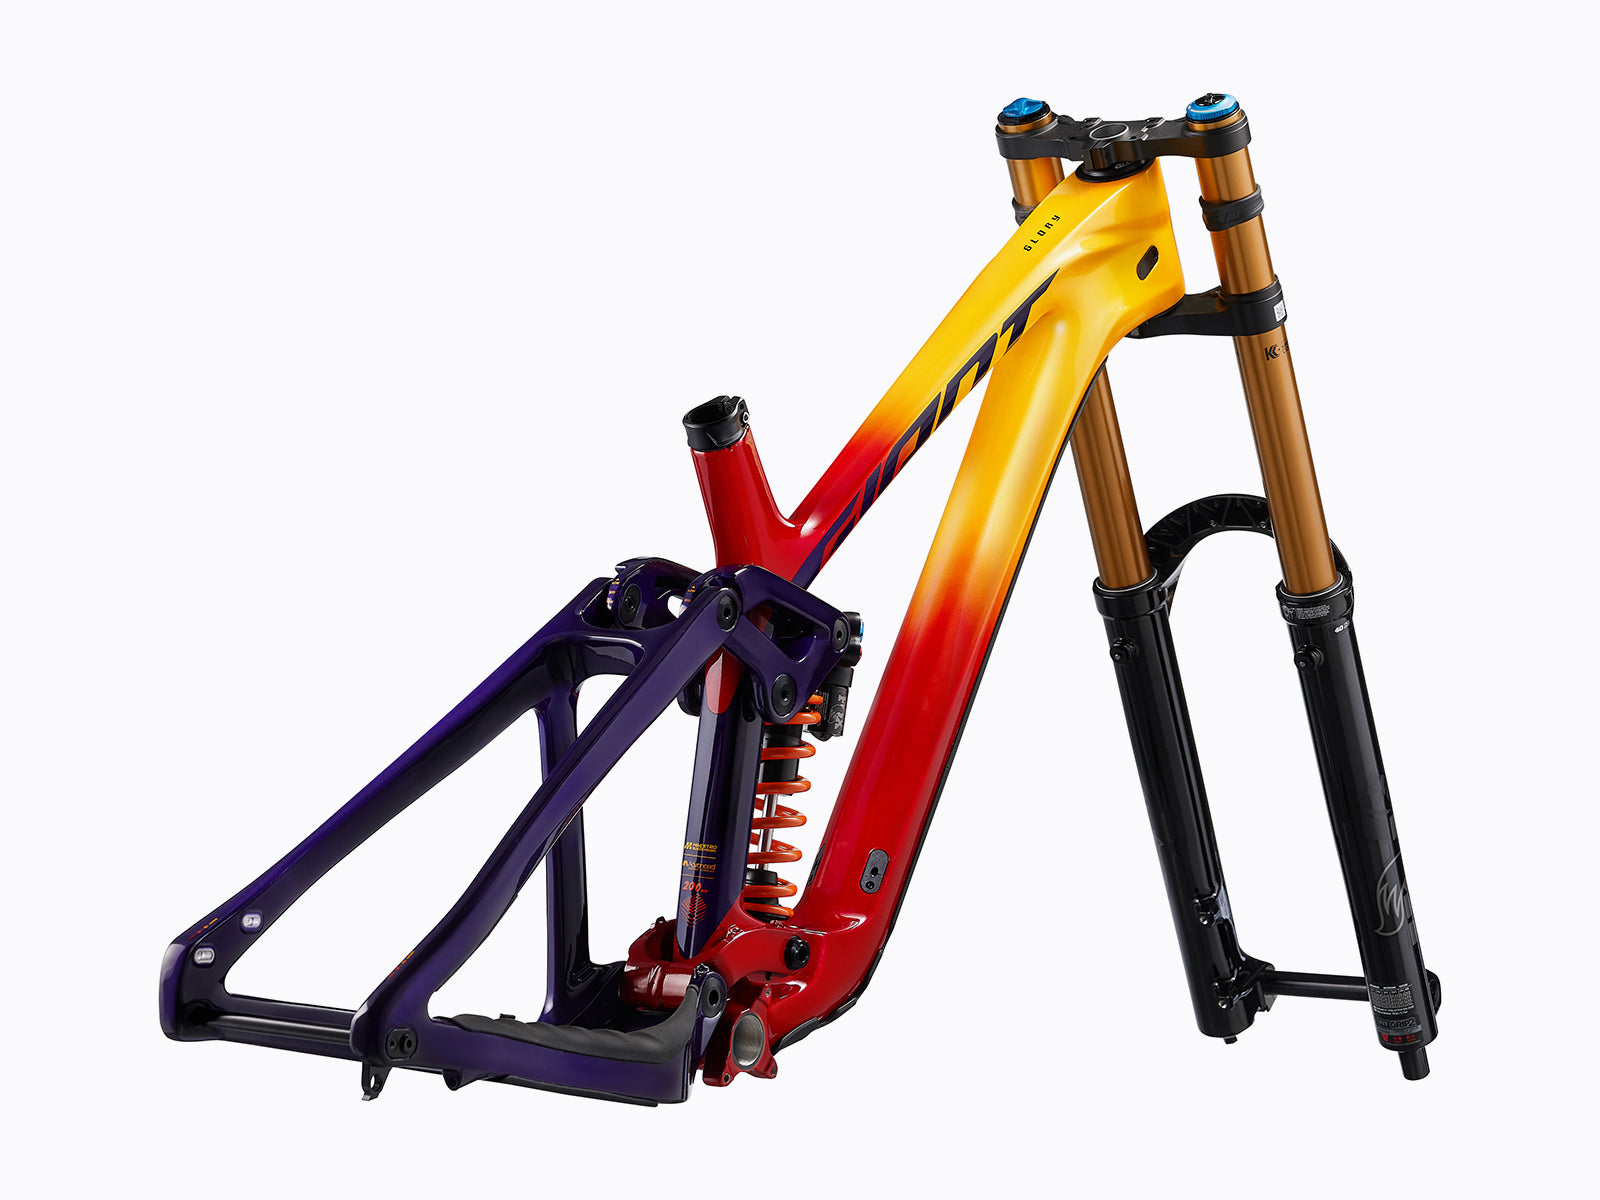 Giant Glory Advanced Pro-FR Legends Edition mtb frameset in yellow, red and dark blue colour accents.